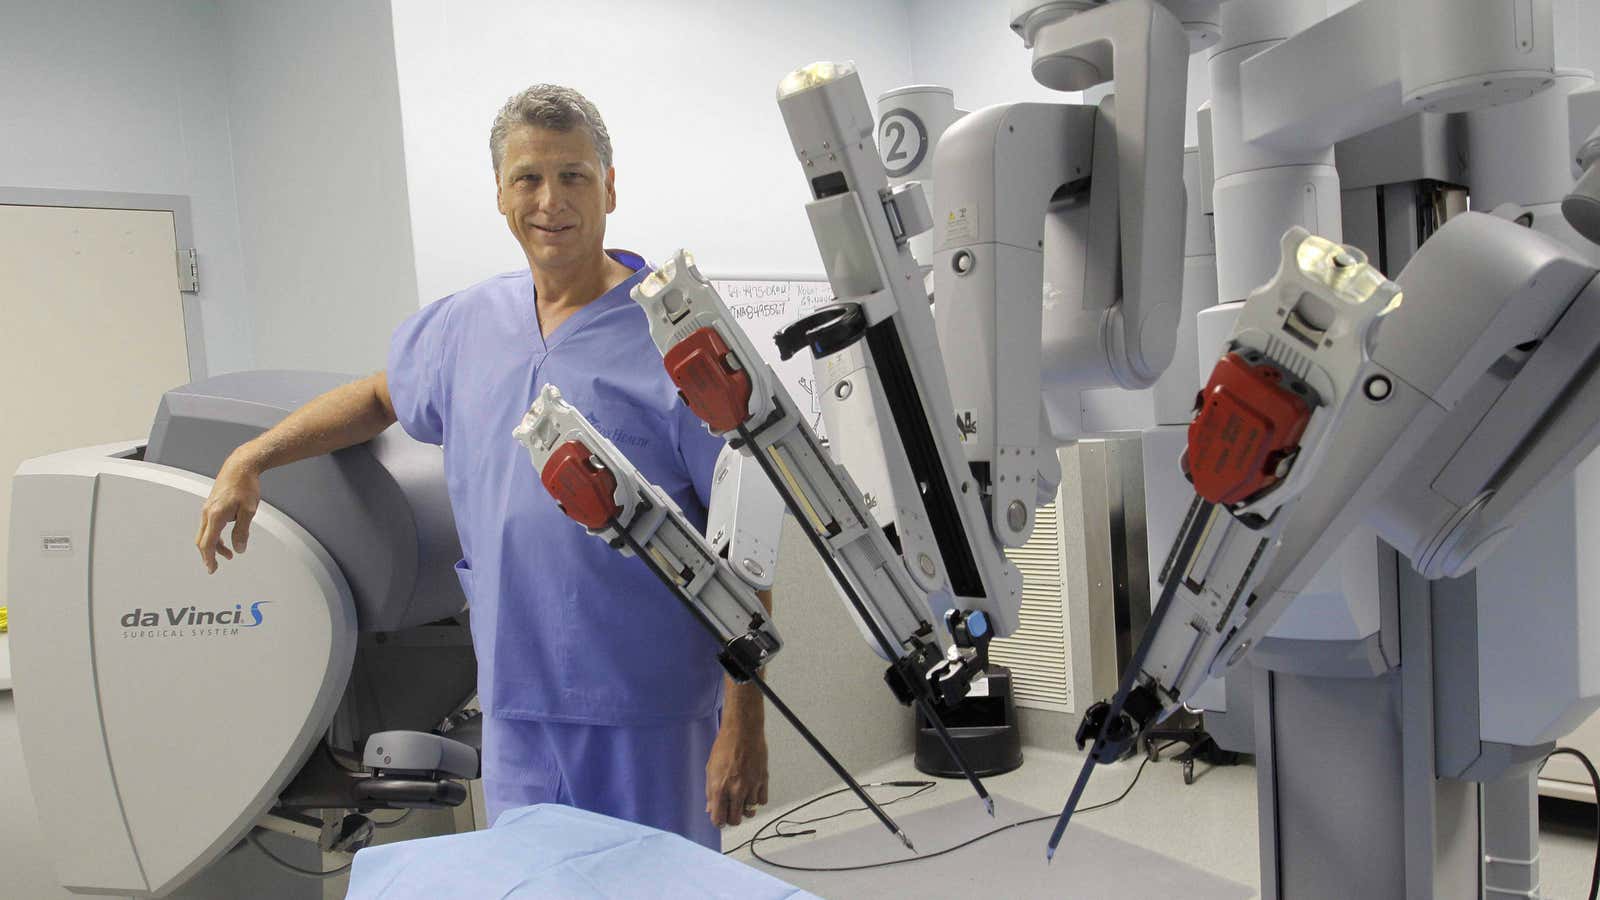 A doctor stands next to the Da Vinci Surgical System robotic surgical machine in Springfield, Mo.